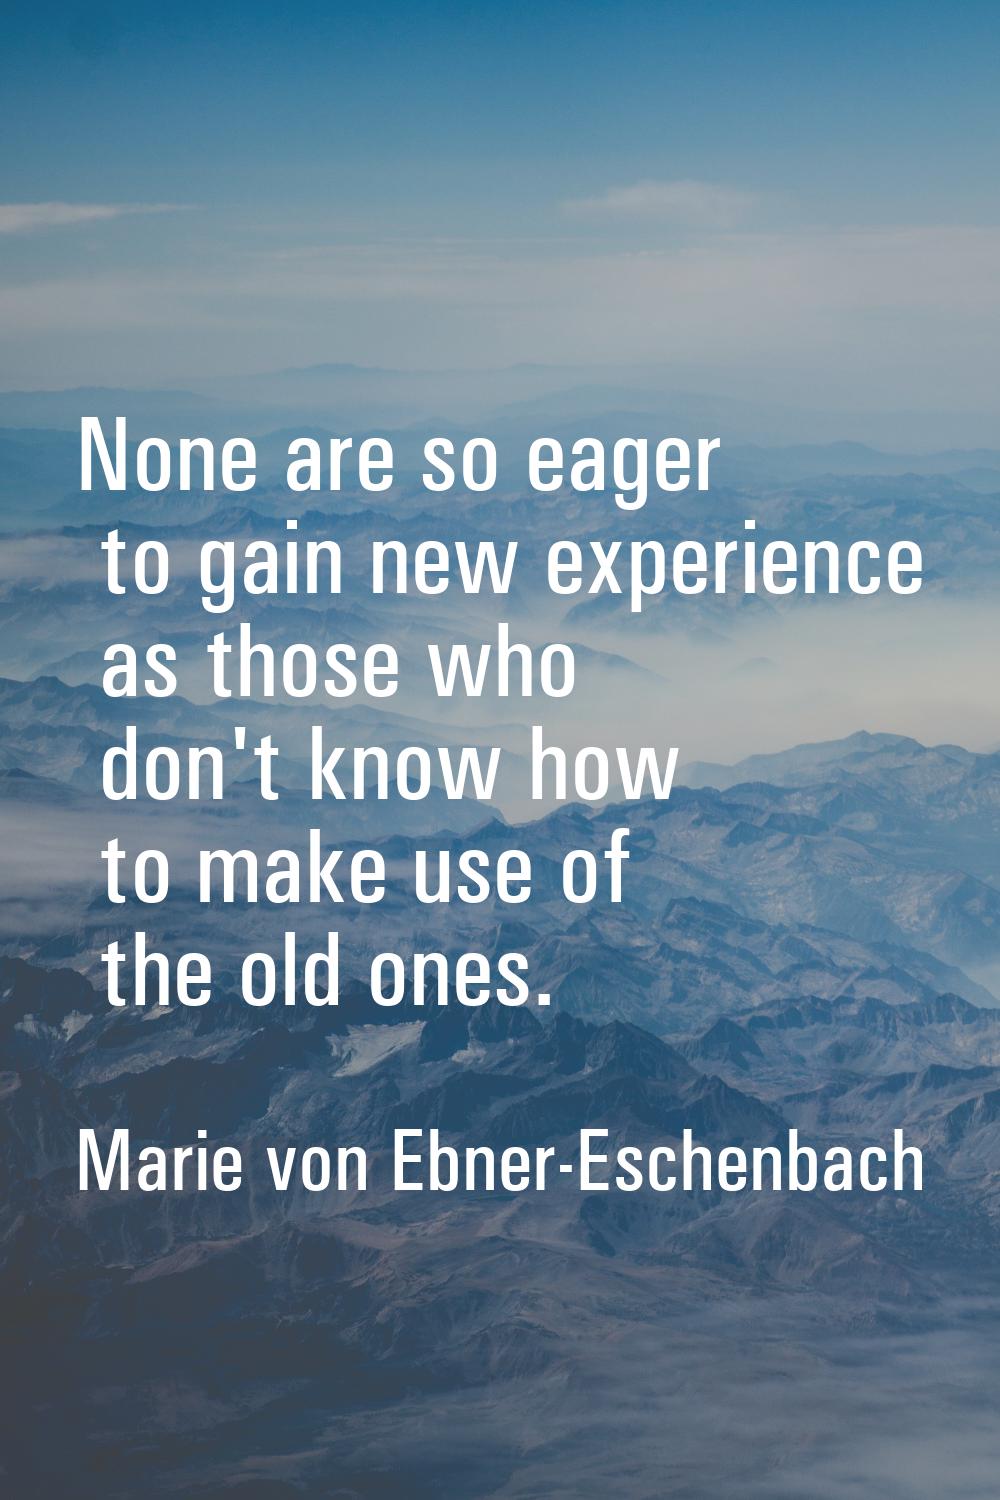 None are so eager to gain new experience as those who don't know how to make use of the old ones.